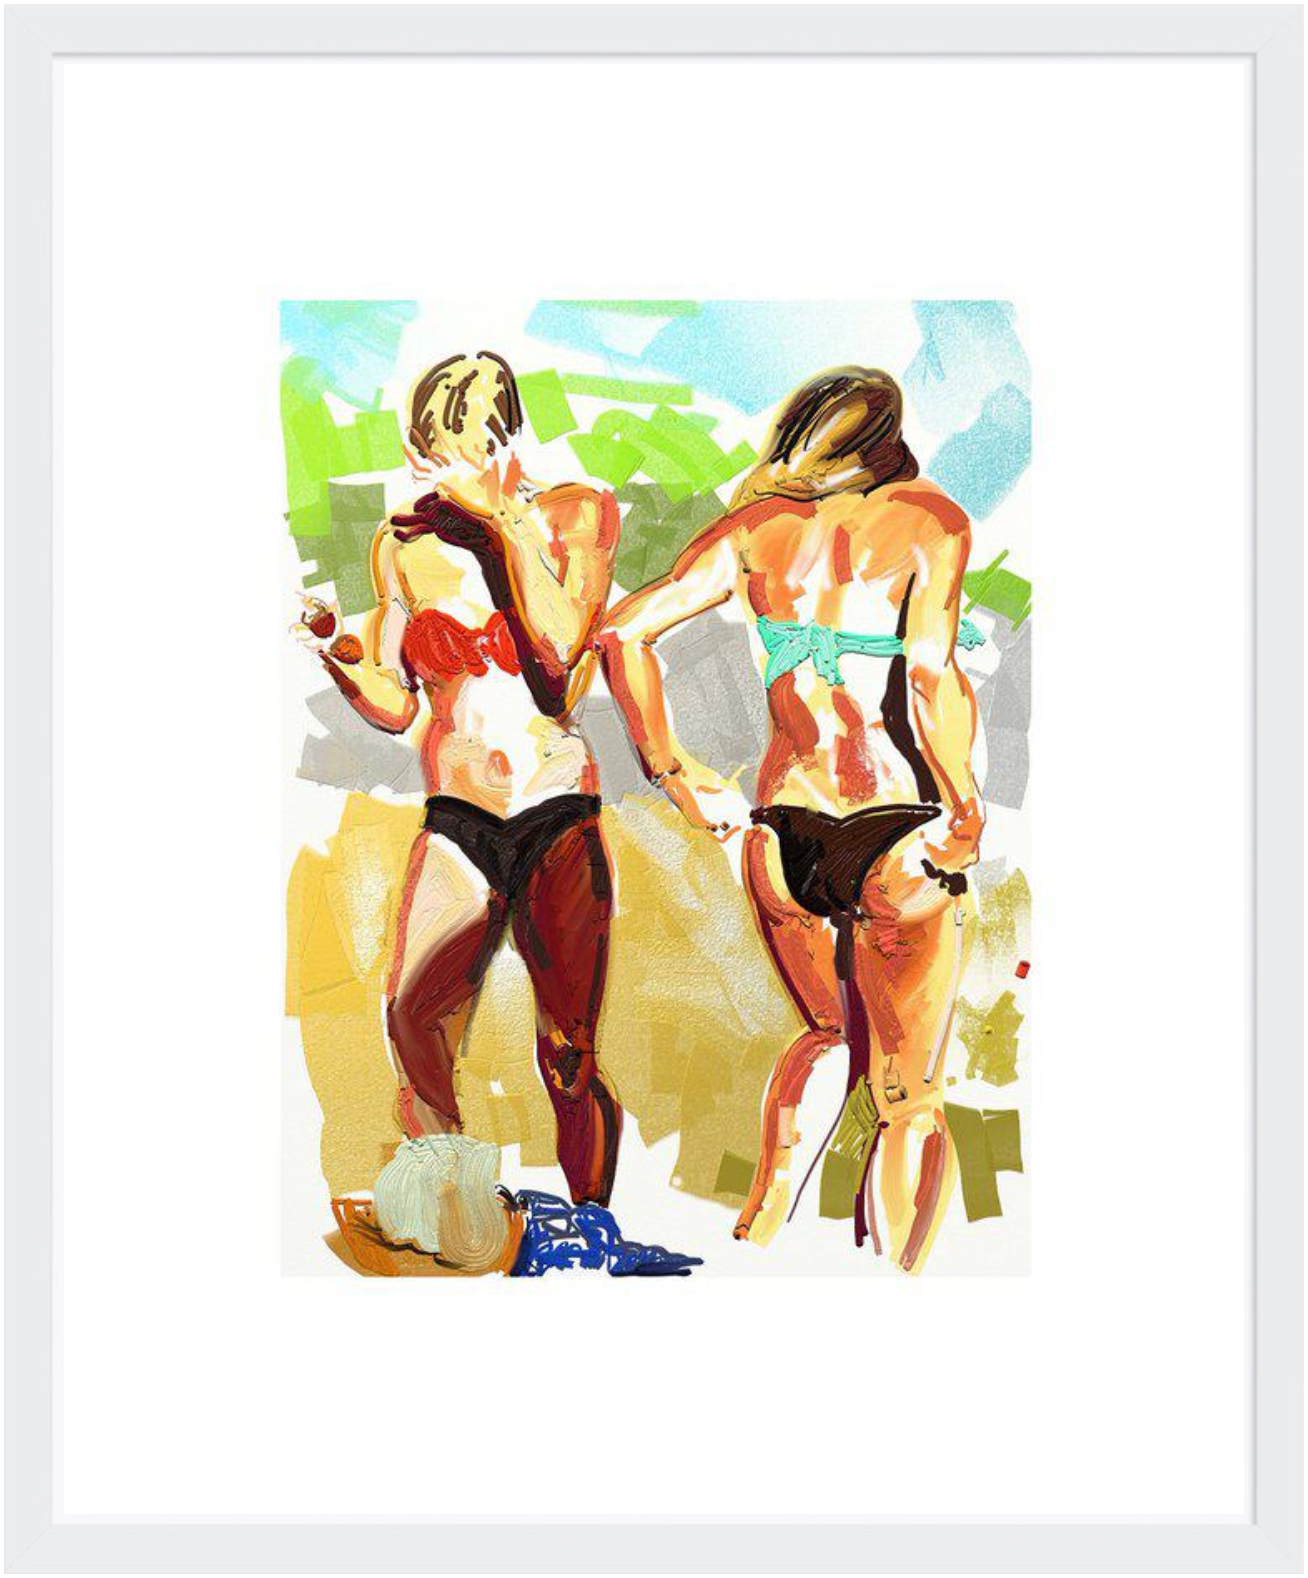 The framed edition of  Eric Fischl, Mix and Match 2020